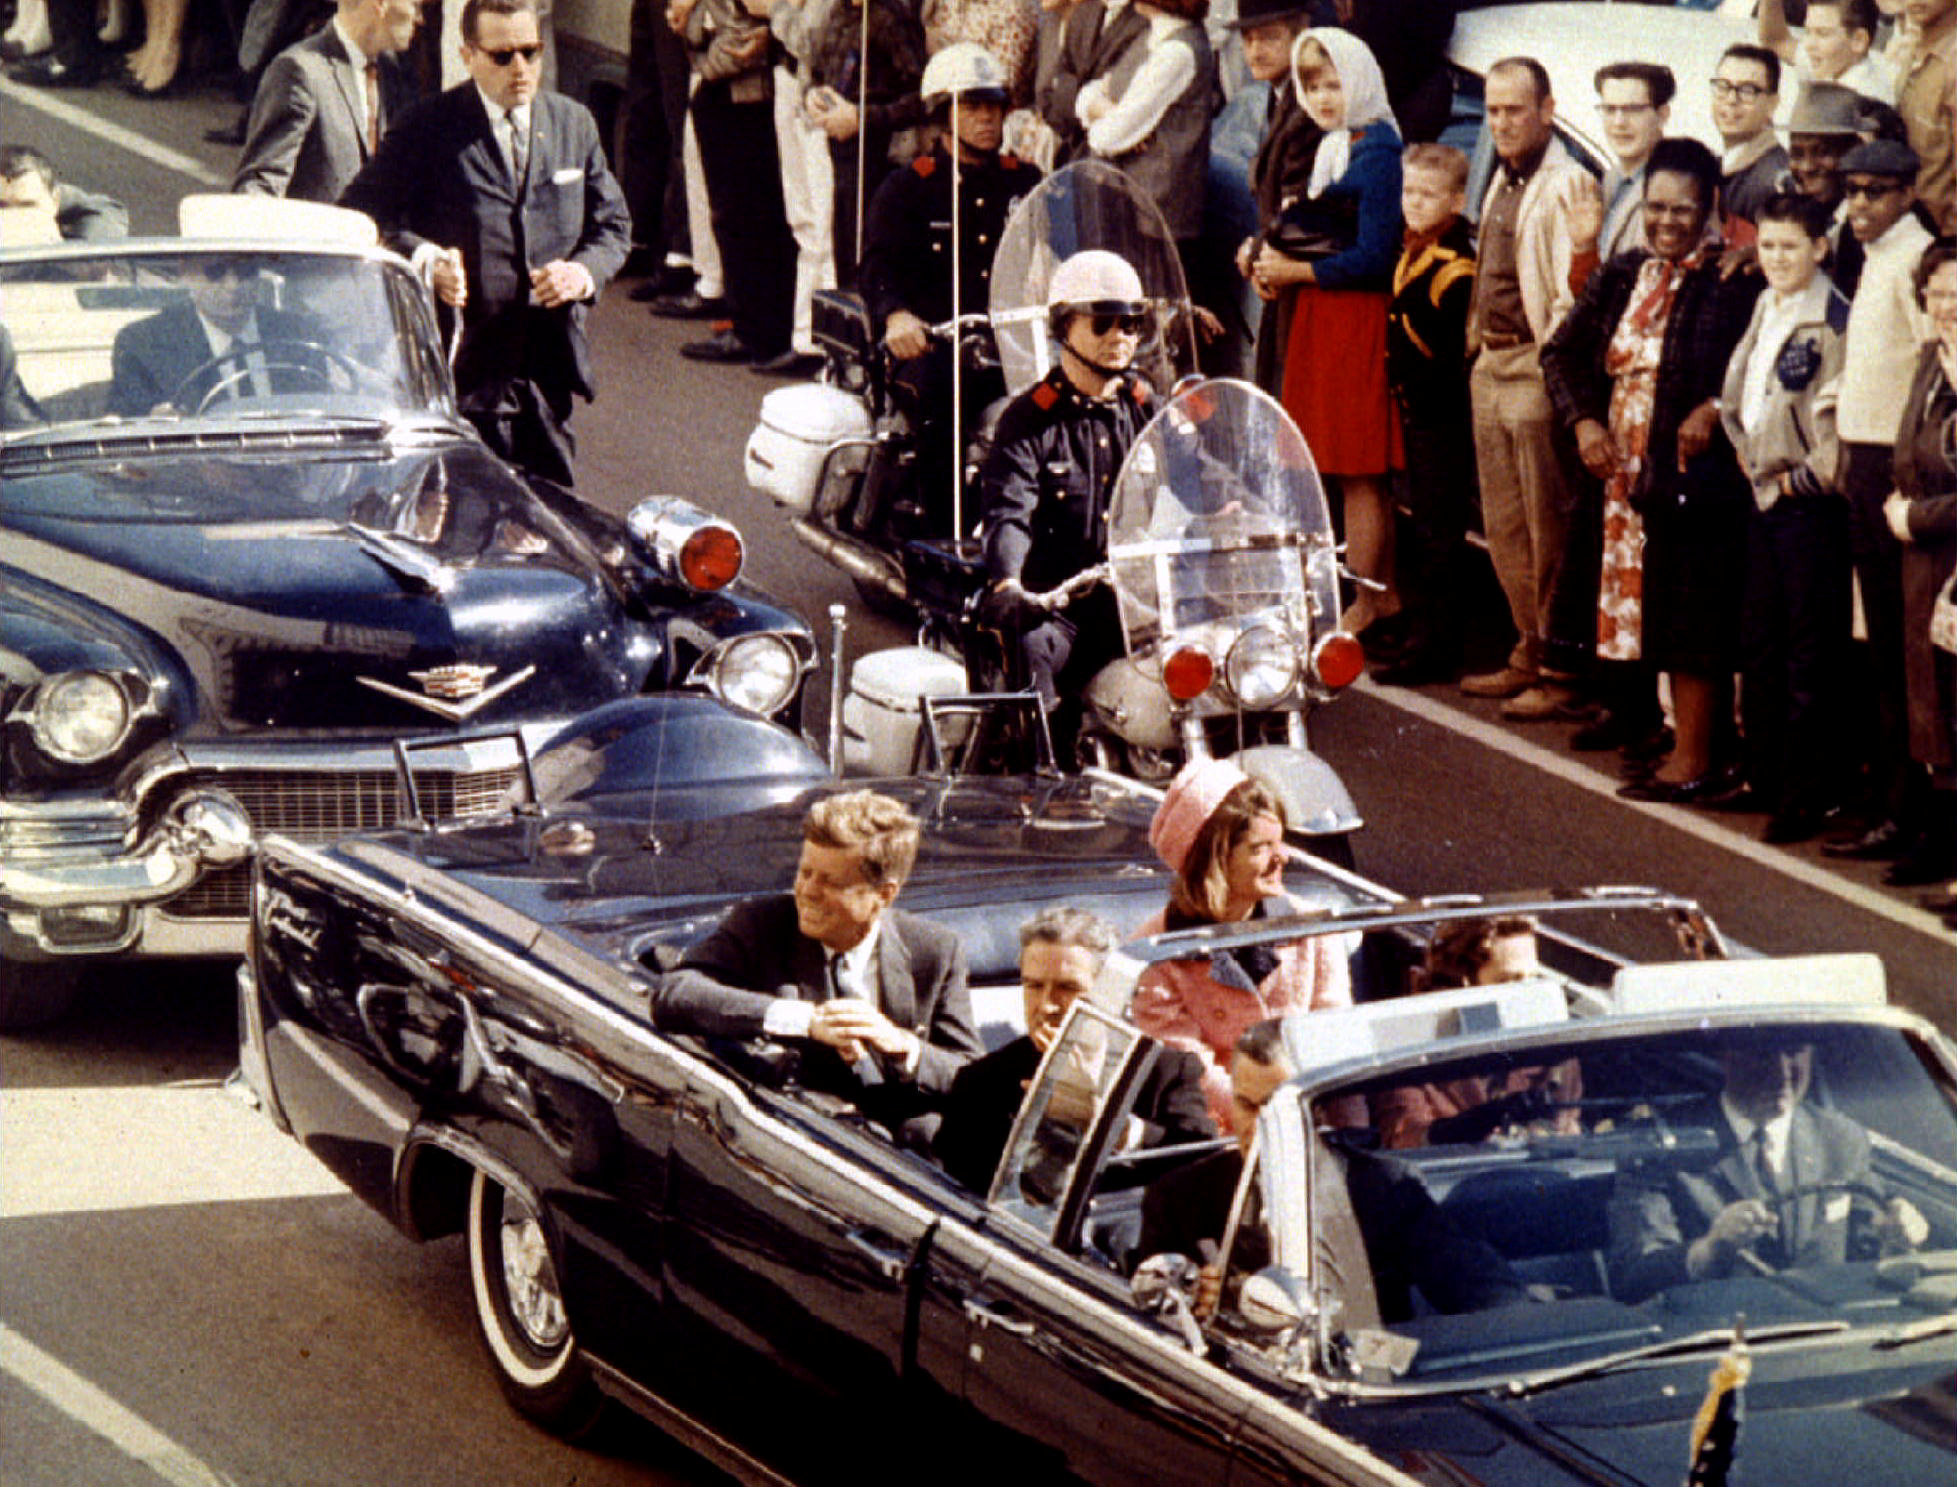 <strong>U.S. President John F. Kennedy, First Lady Jaqueline Kennedy and Texas Governor John Connally ride in a liousine moments before Kennedy was assassinated, in Dallas, Texas November 22, 1963.</strong>